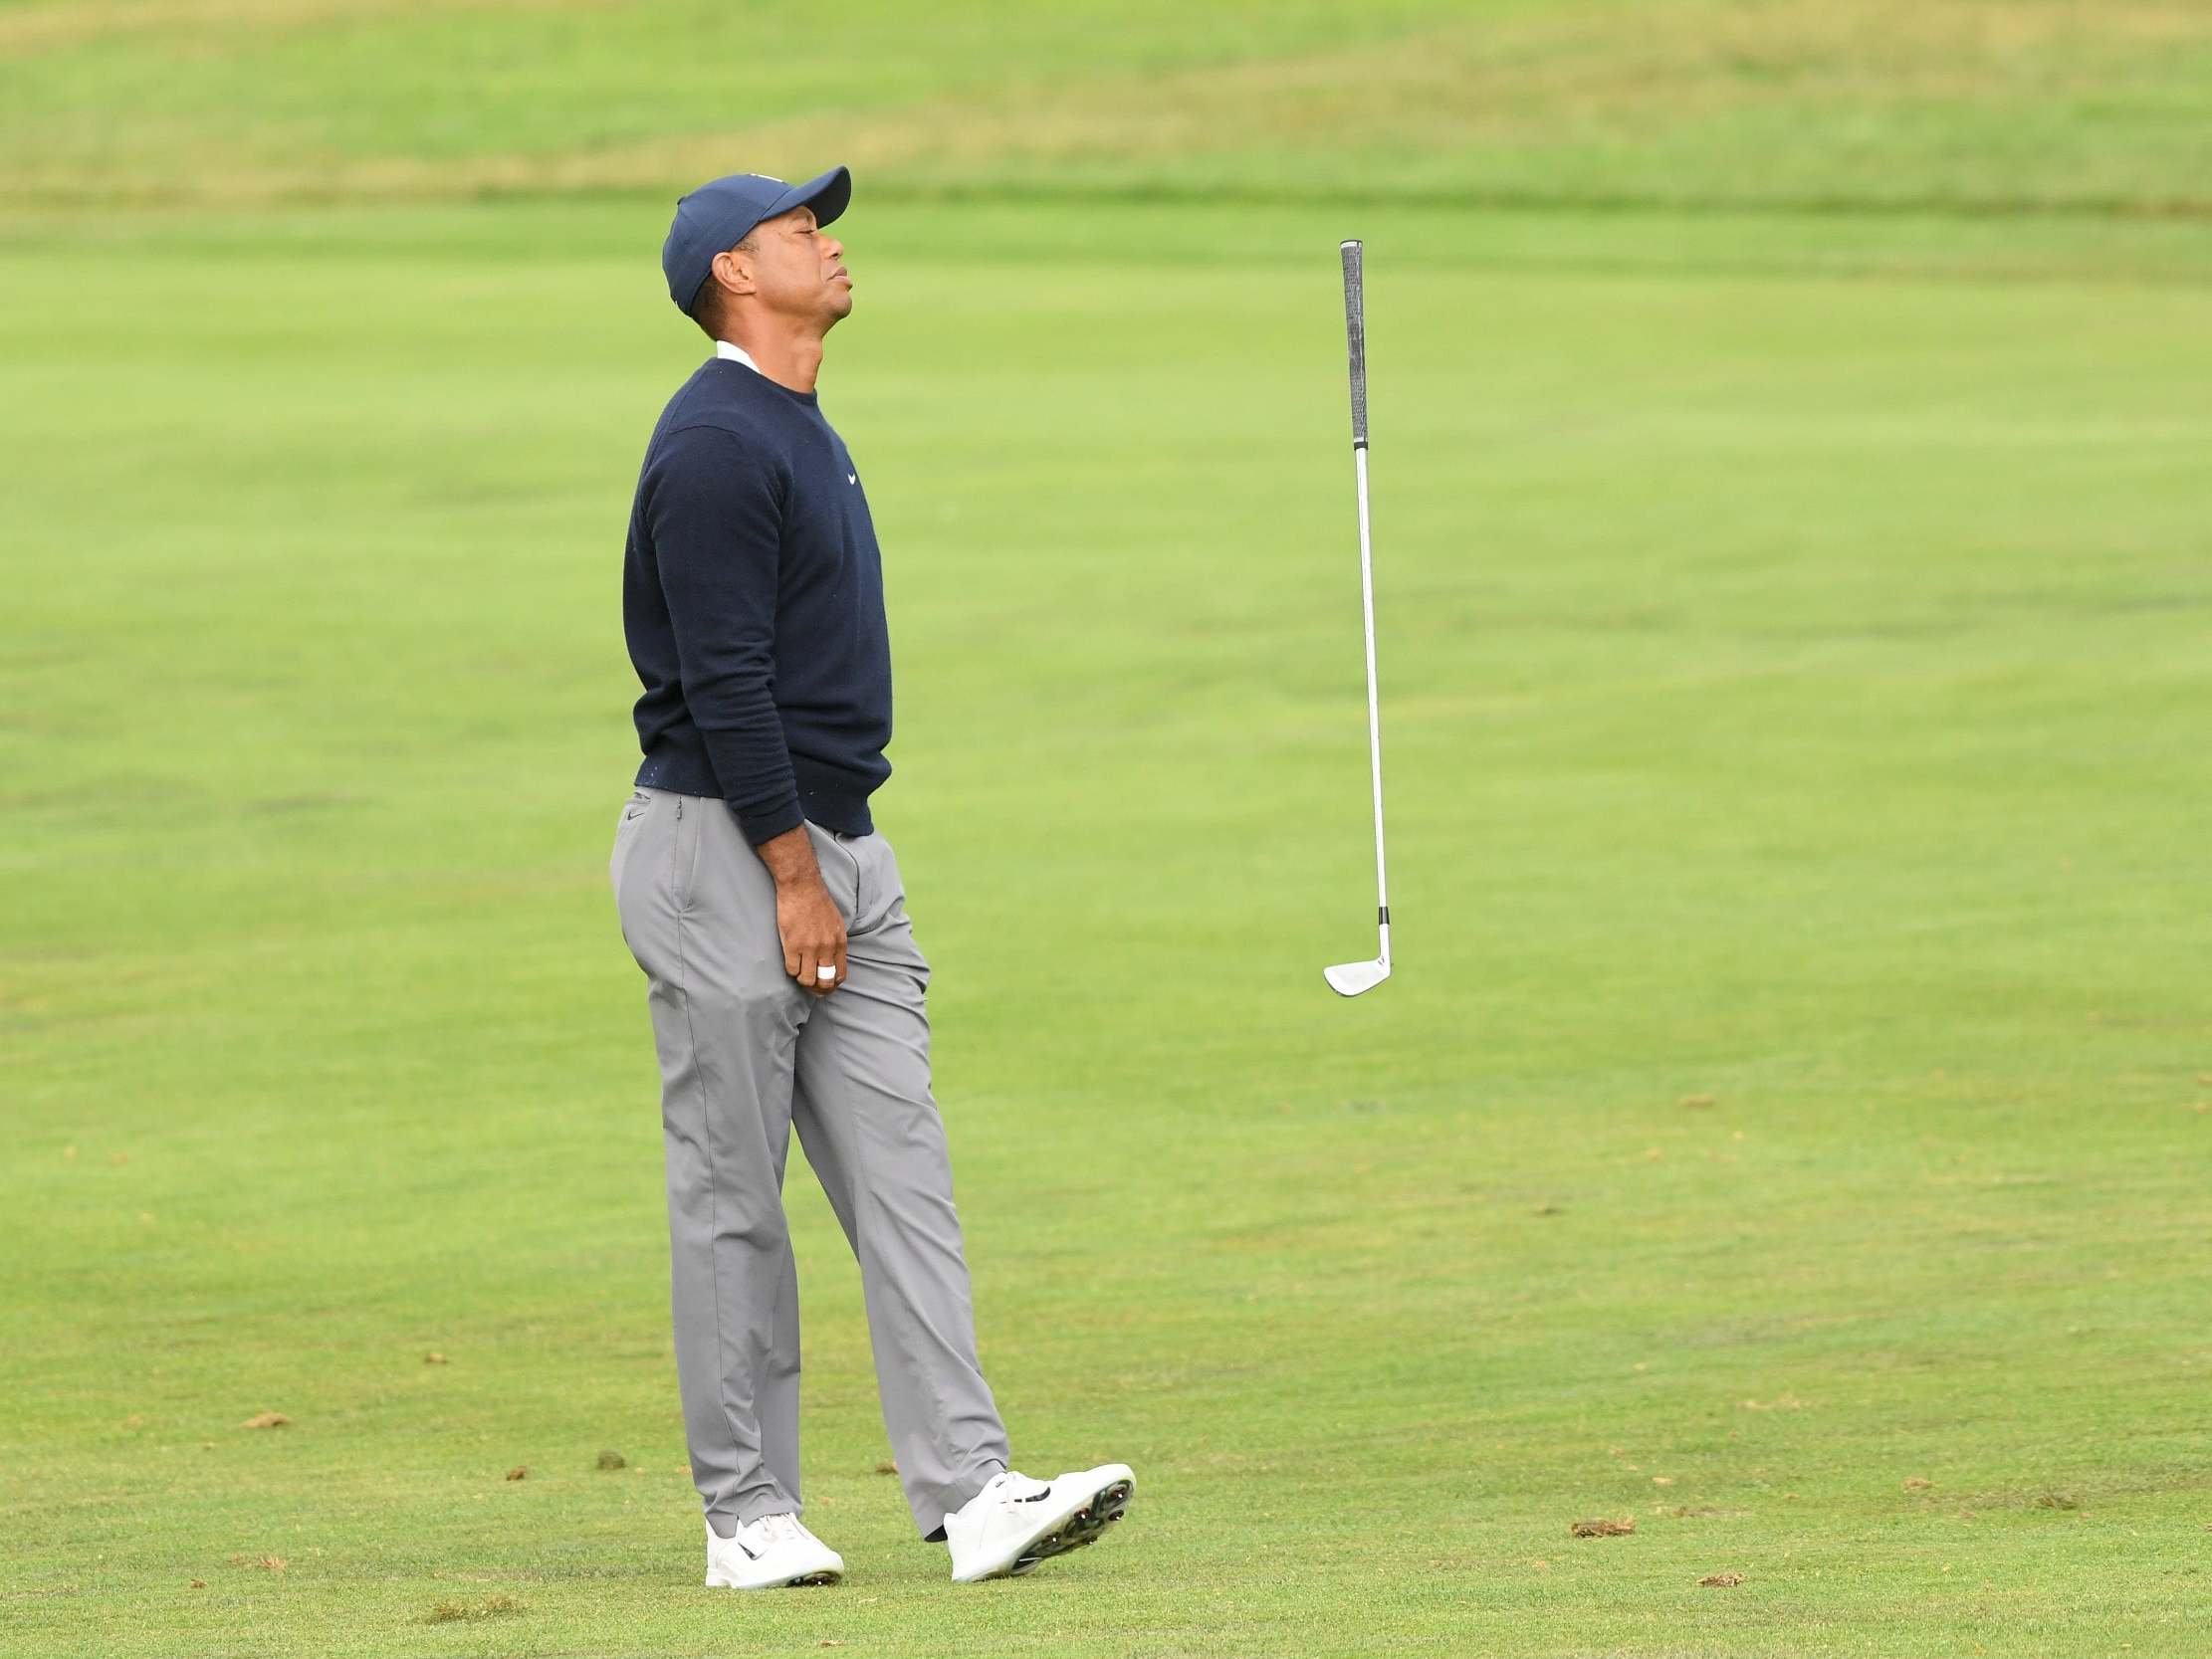 Tiger Woods reacts on the 13 hole at TPC Harding Park